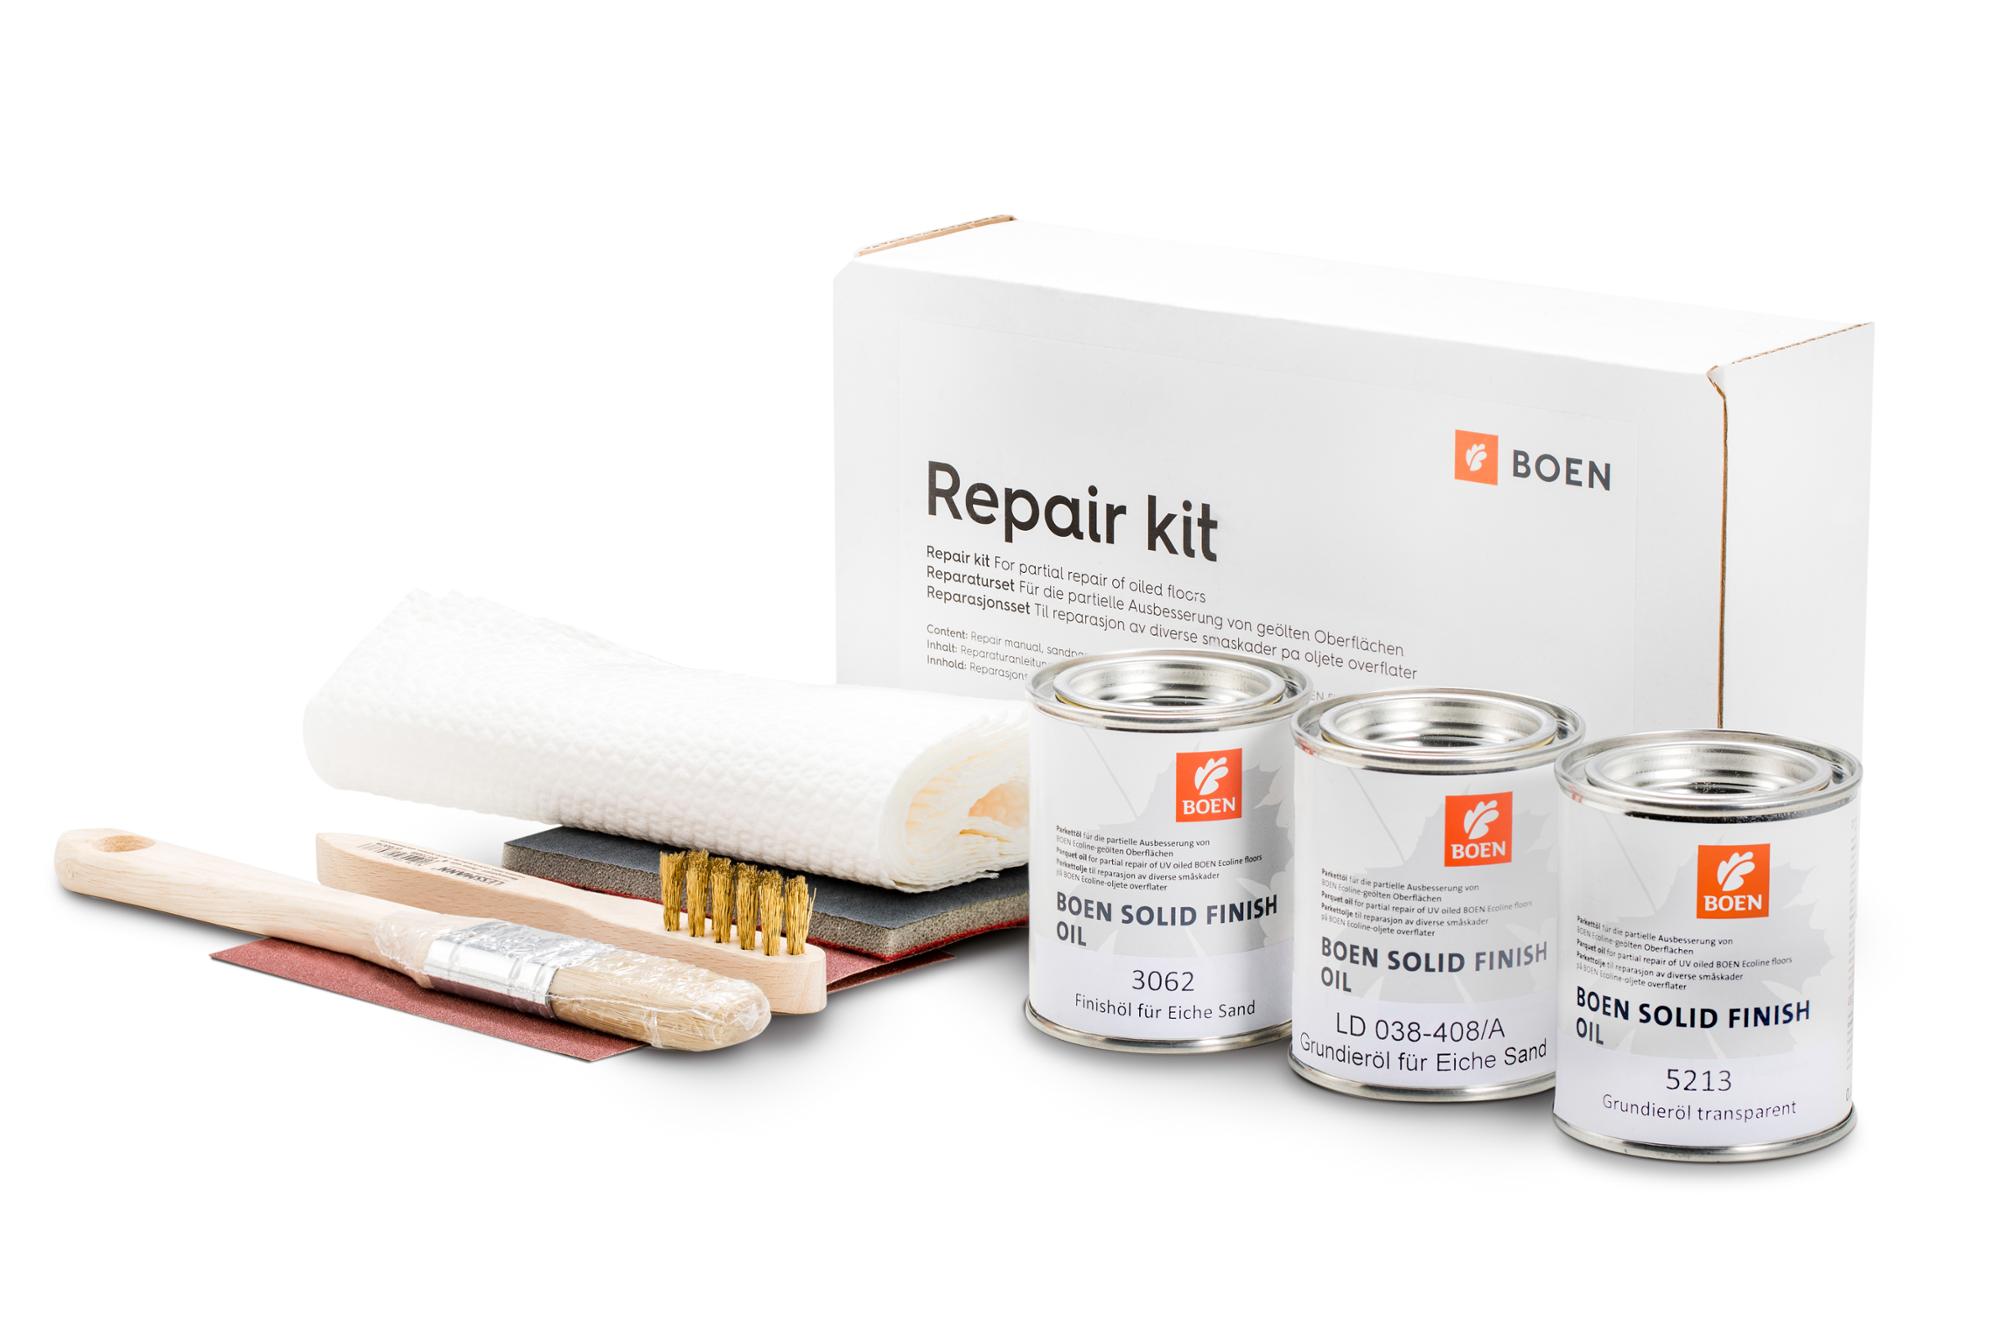 BOEN kit riparazione per Rovere Graphite

For the partial repair of natural oiled surfaces.
Content: Repair instruction, abrasive paper P 150,
abrasive web P 360, 0,125 l BOEN Live Natural Oil,
paint brush, cleaning cloths.